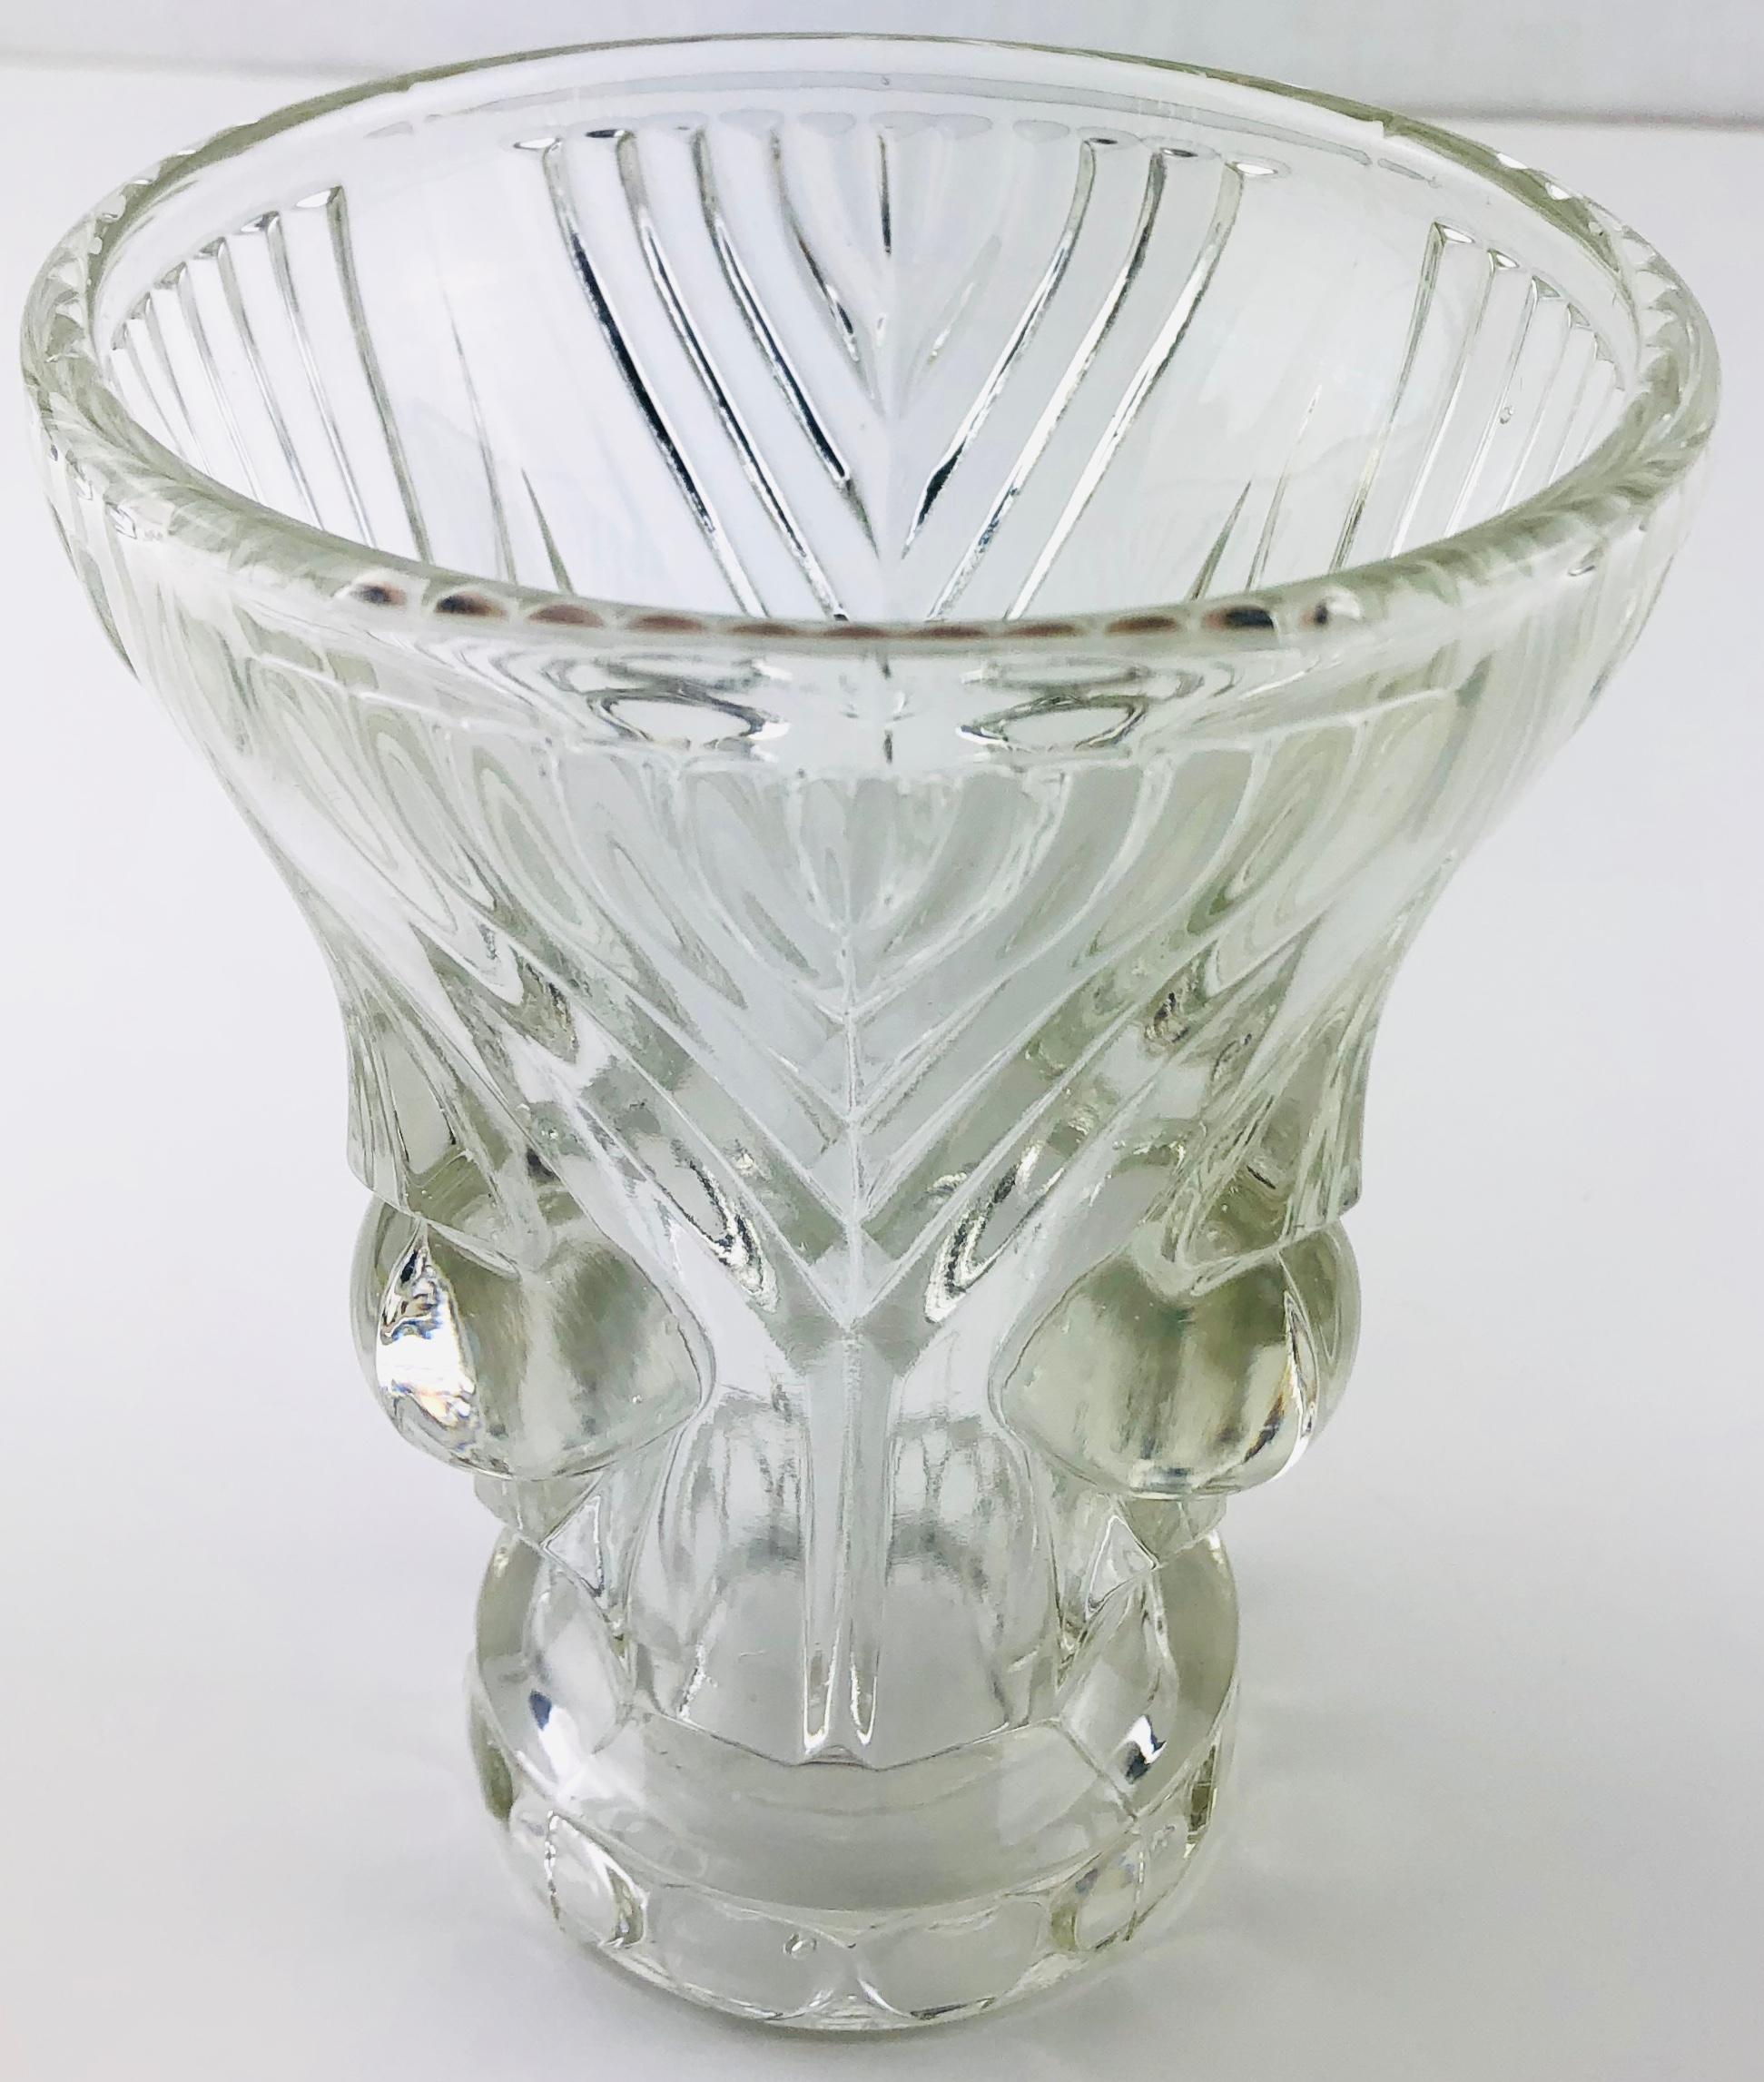 An exquisite small French Art Deco pressed glass vase. Adorned with 1920s-1930s period details, attributed to Lalique. Unmarked. 

The glass is very clear, however, it was challenging to capture the clarity in the photographs. 

Pressed glass is